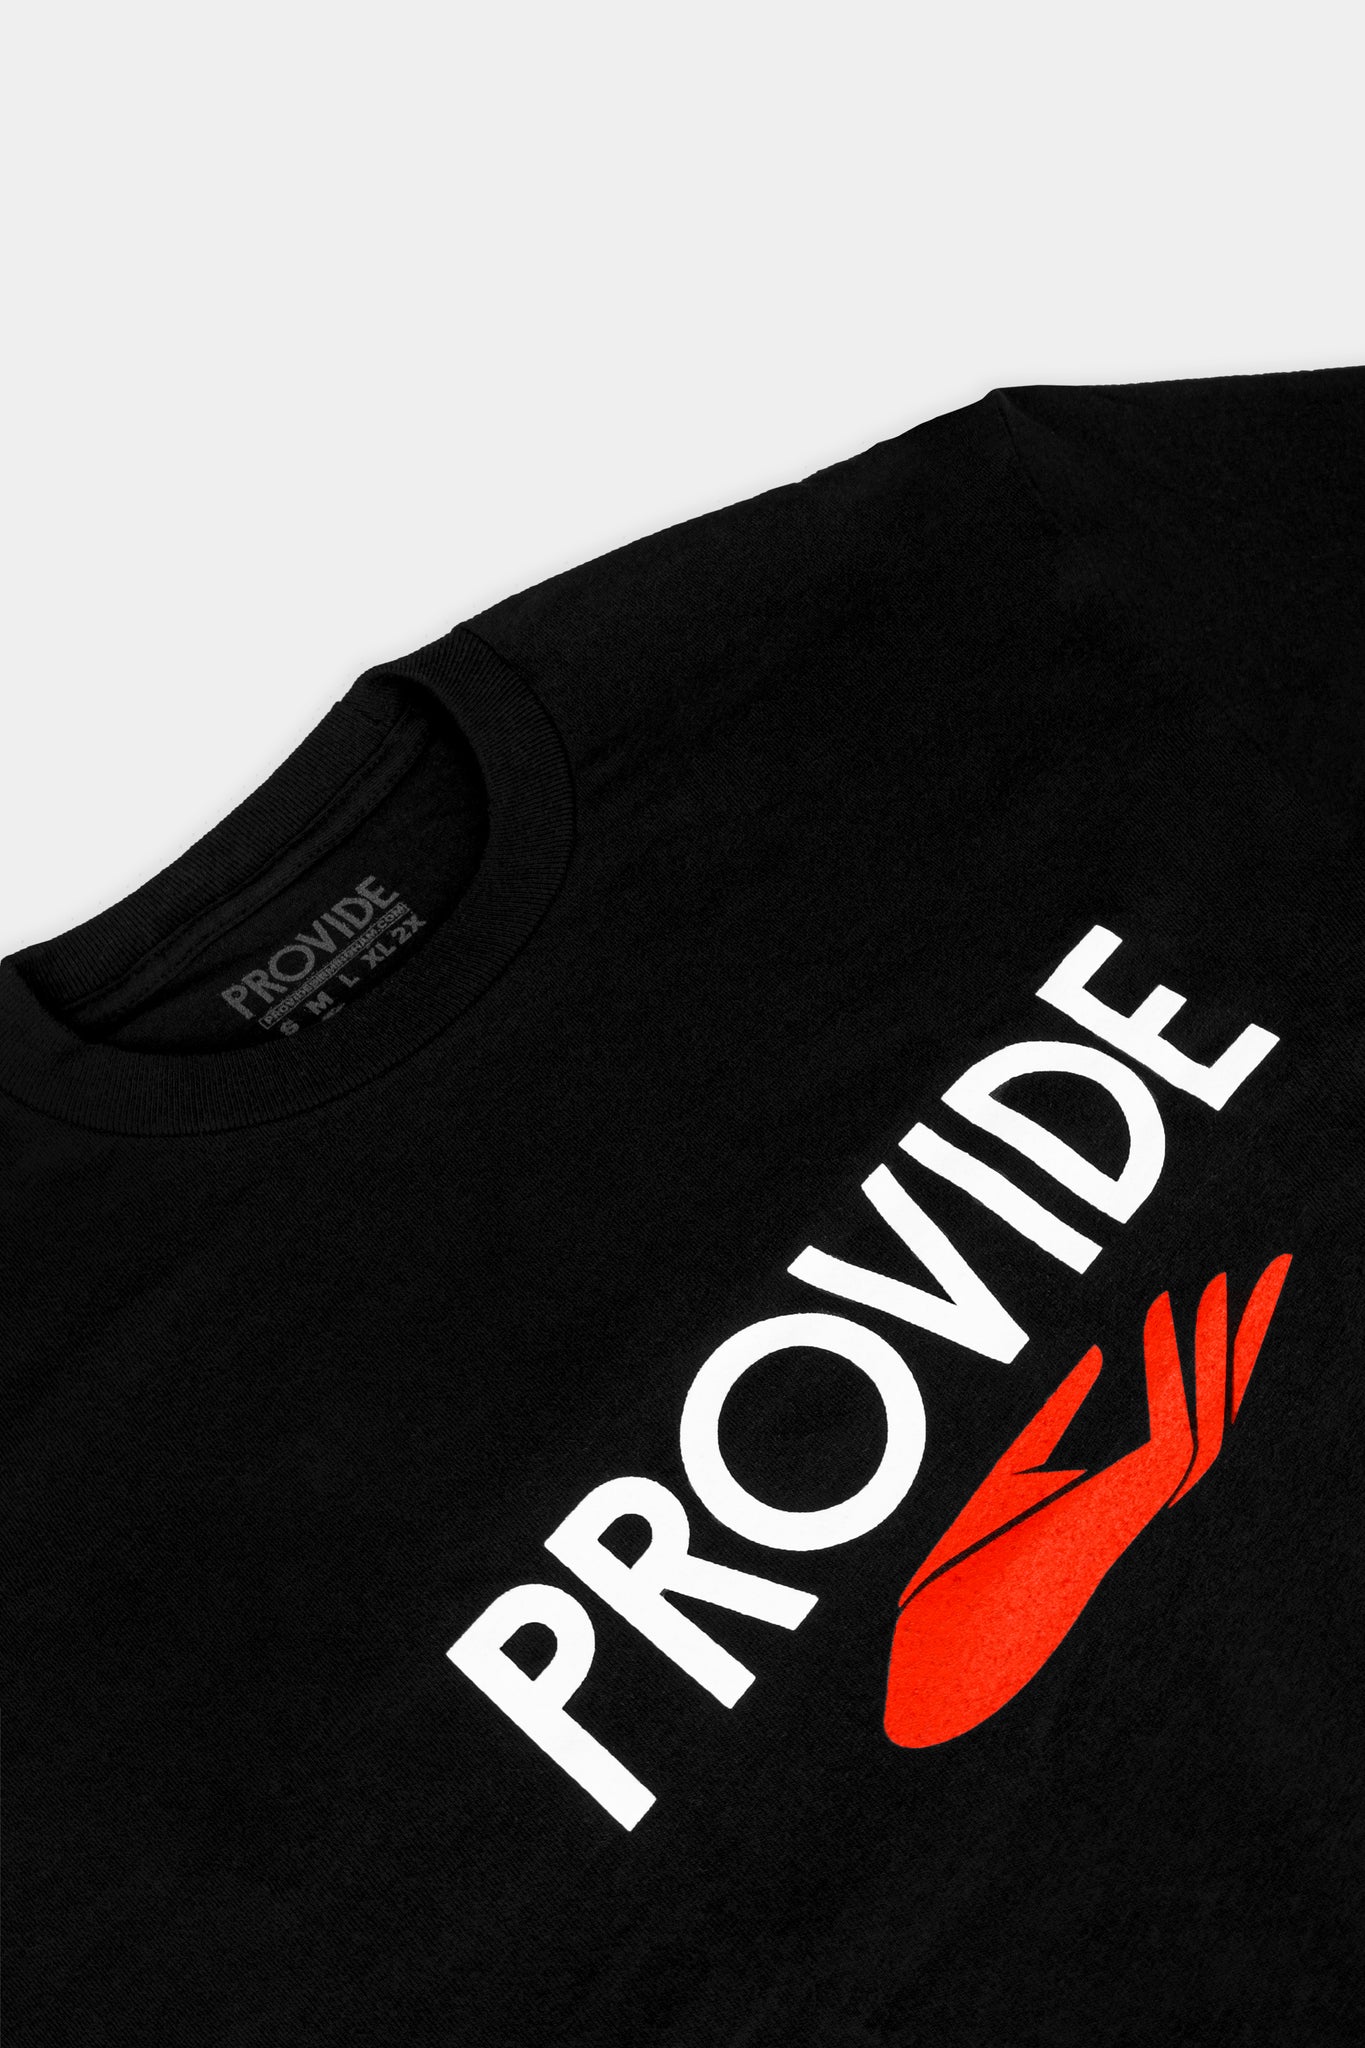 Provide black tee with large chest print of wordmark and red hand logo (close up)